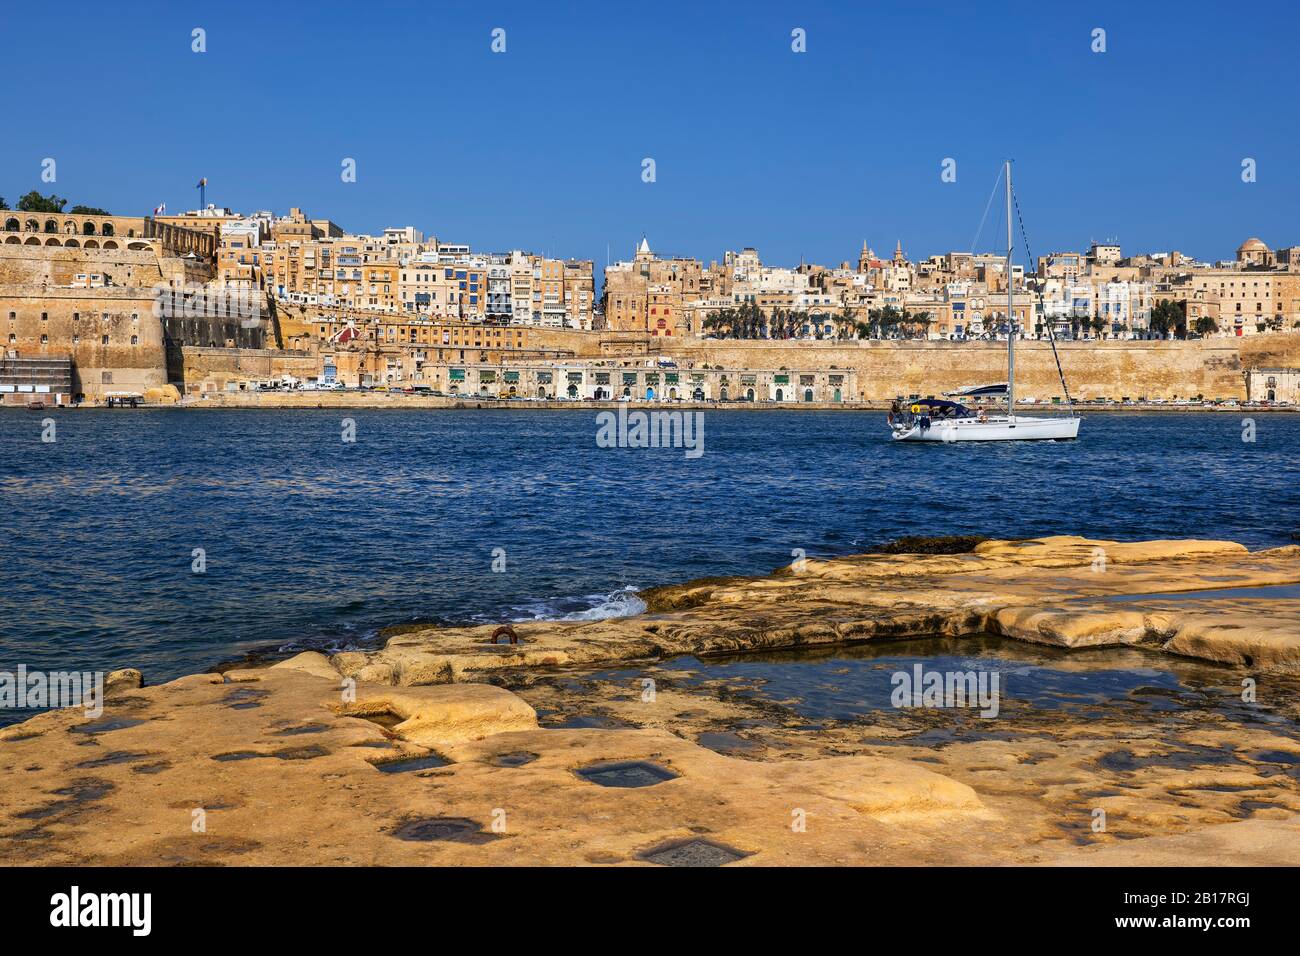 Malta, Valletta, View of city from Birgu side with sailboat on Grand Harbour Stock Photo